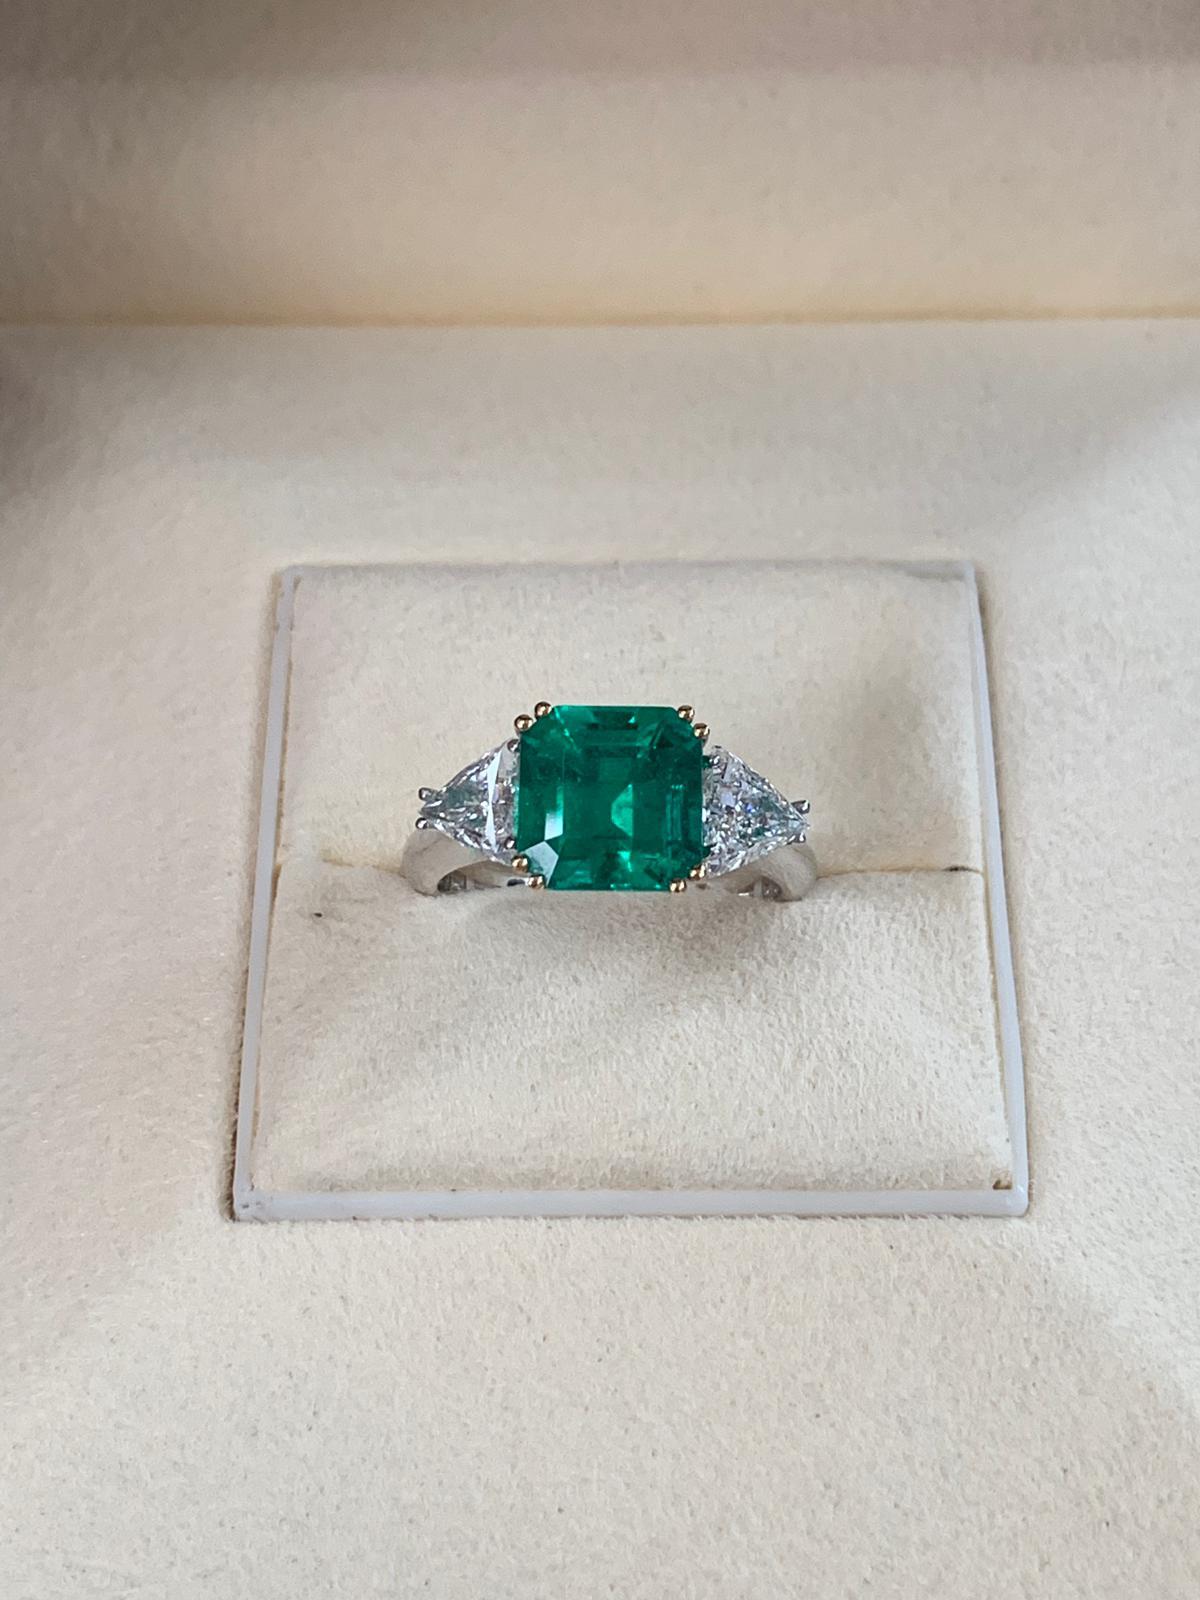 Beautiful 2.93 carats of Colombian Emerald, surrounded by 2 white trillion cut diamond 0.92 total carats. Set on 4 prong 18k white gold.